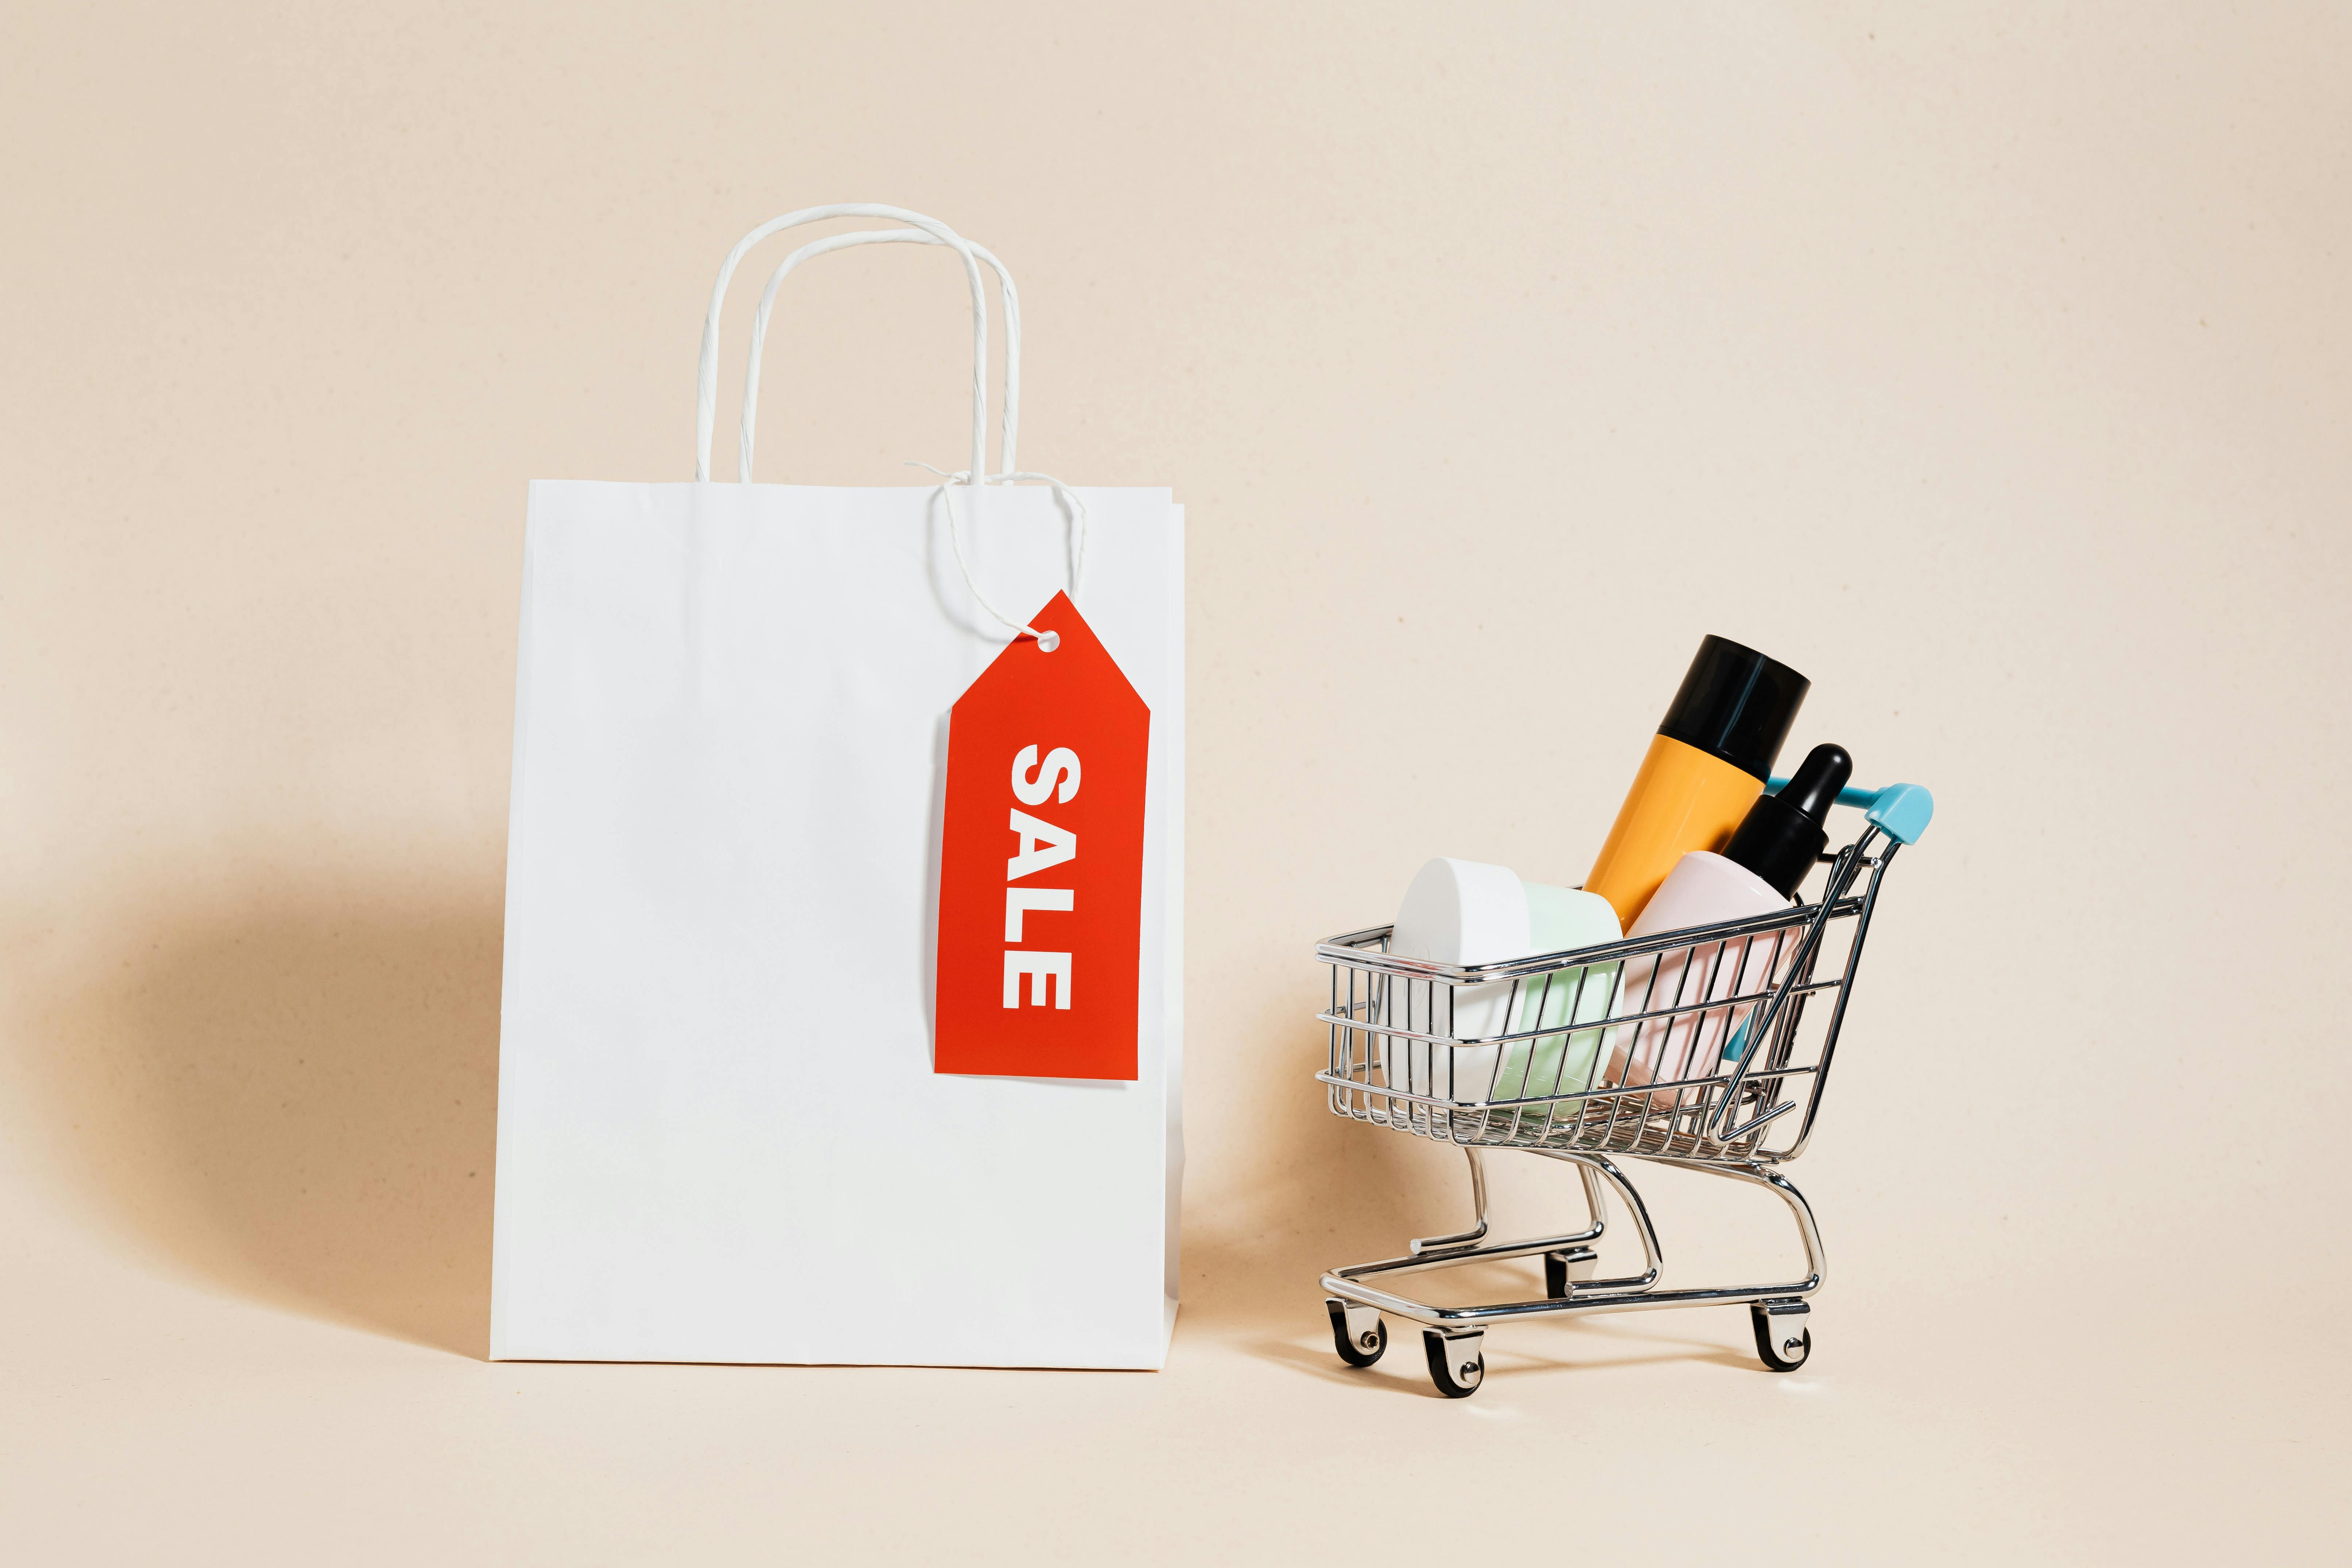 a white paper bag and shopping cart on beige background